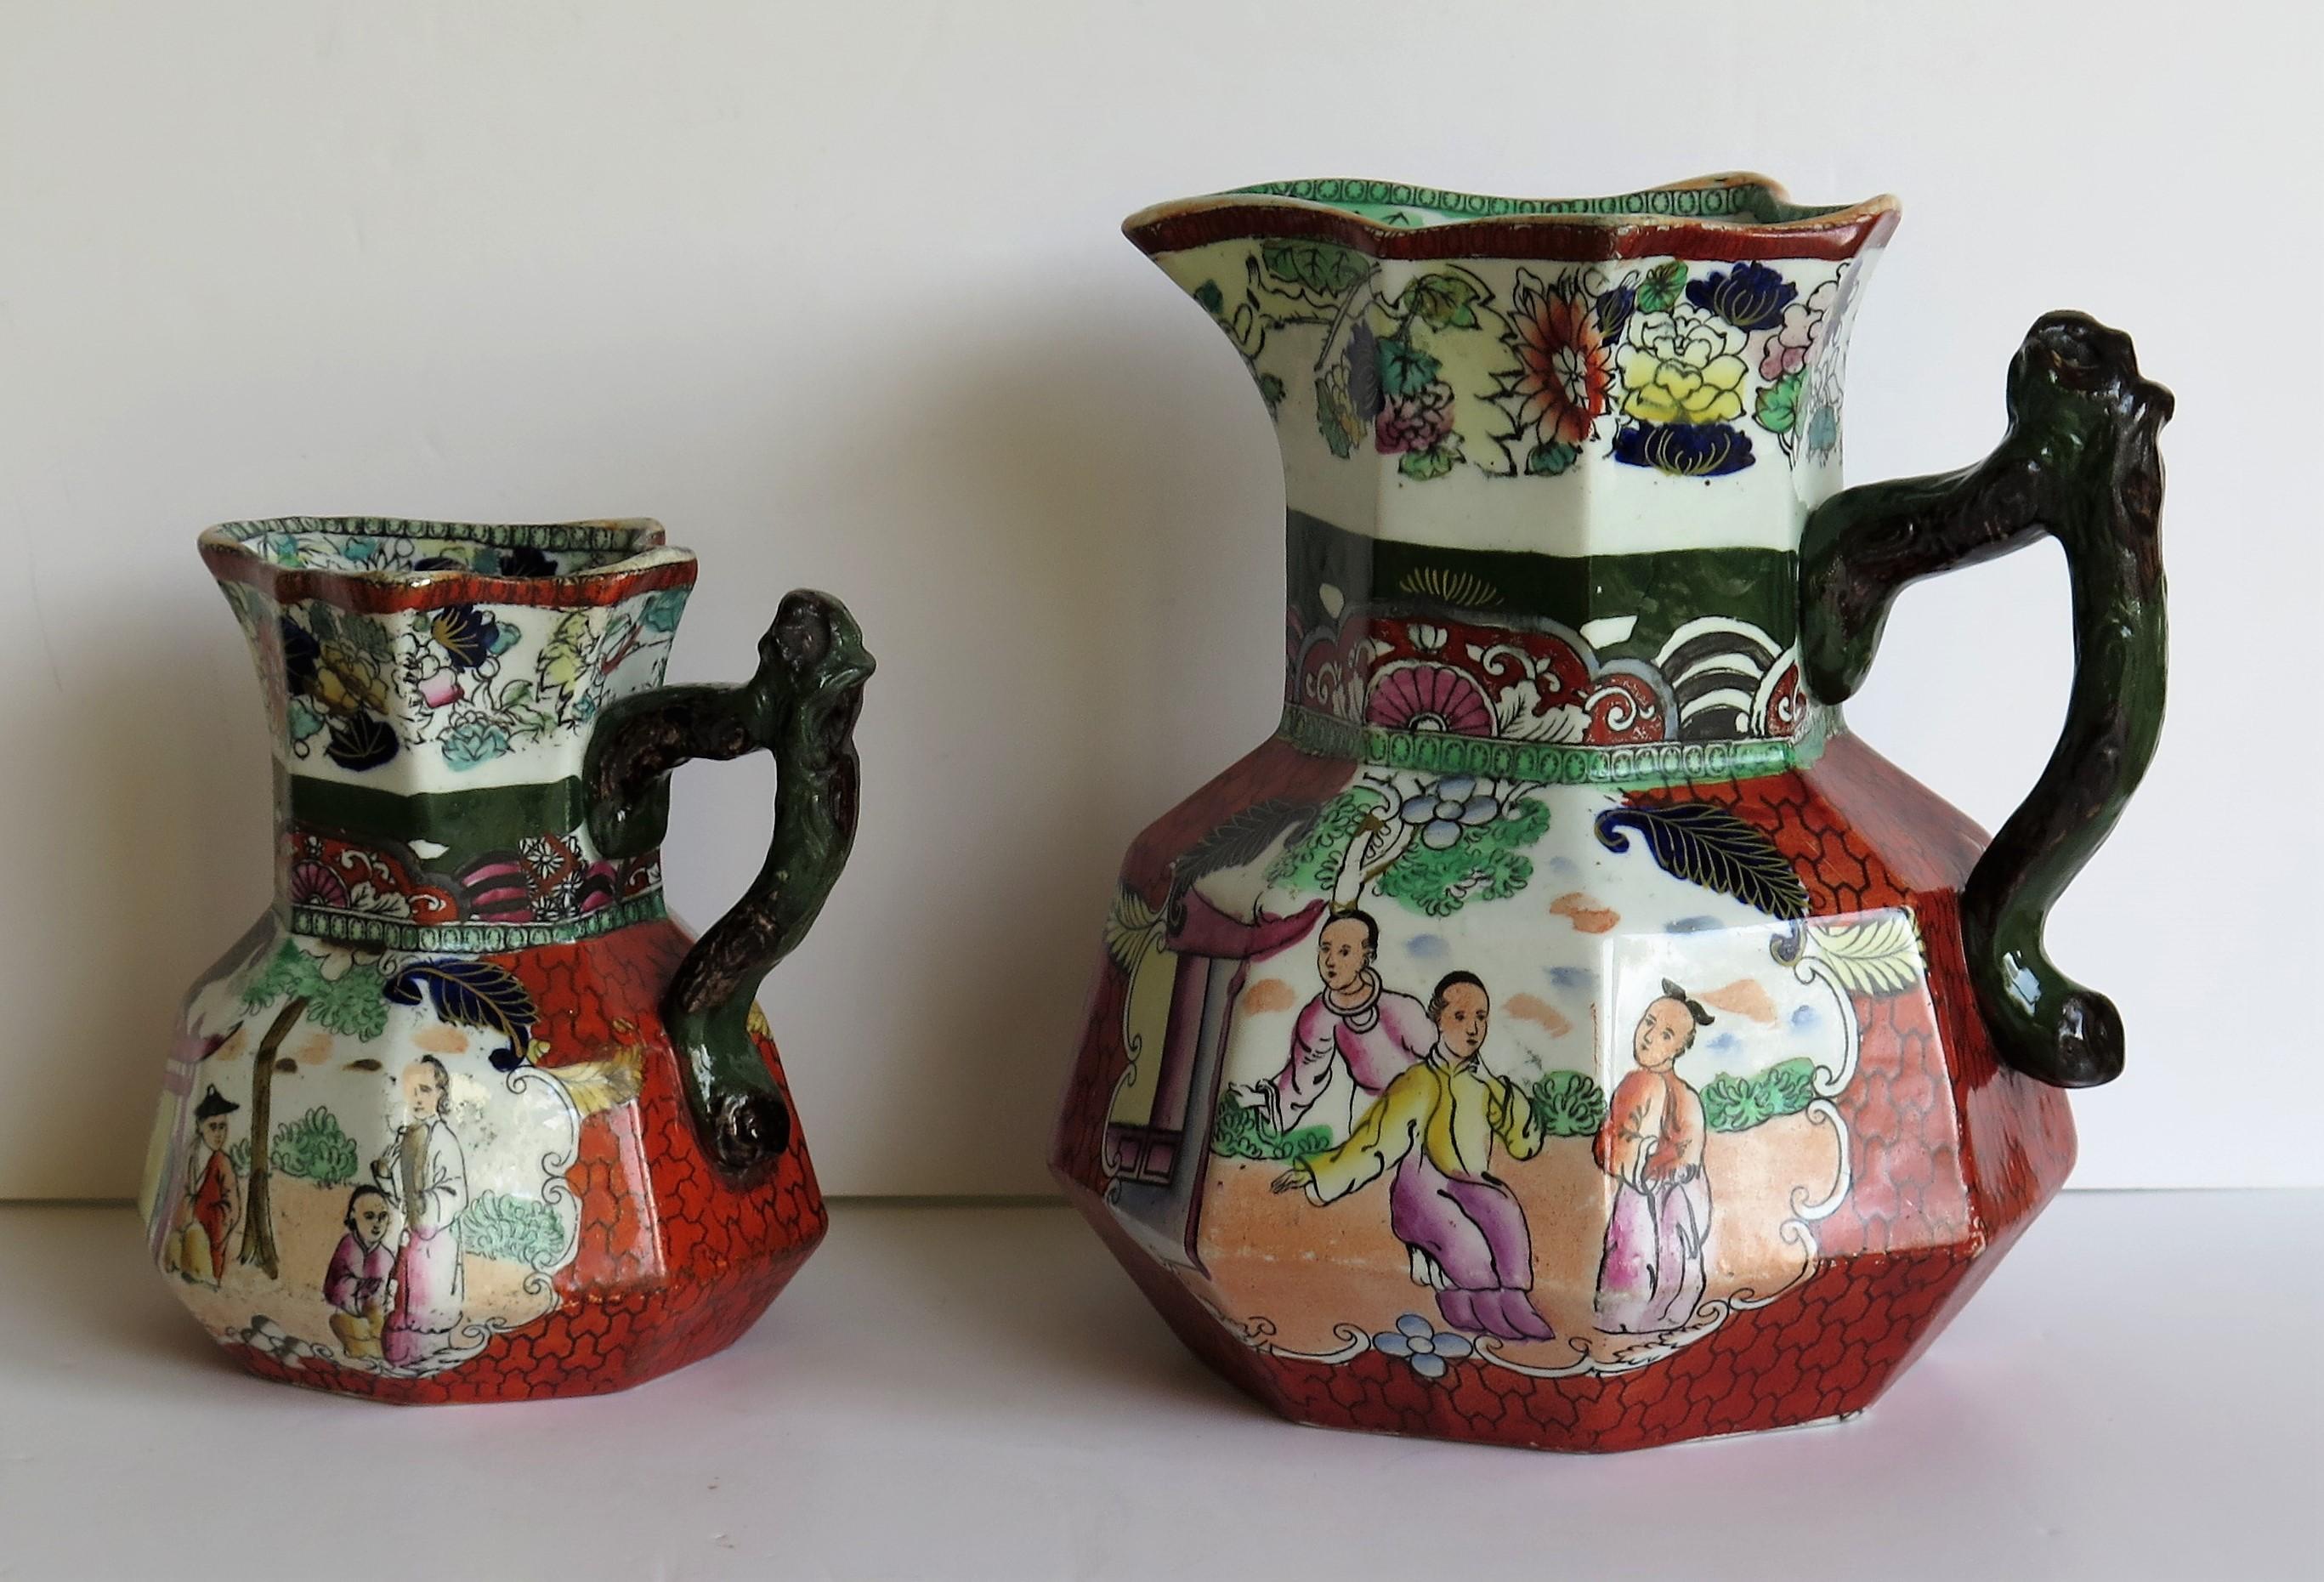 This is two very good Hydra Jugs or pitchers with the rarer branch handles, in the Red Scale Conversation Group Pattern by Mason's Ironstone, England, dating to the second quarter of the 19th century, circa 1835. 

The jugs are very decorative and